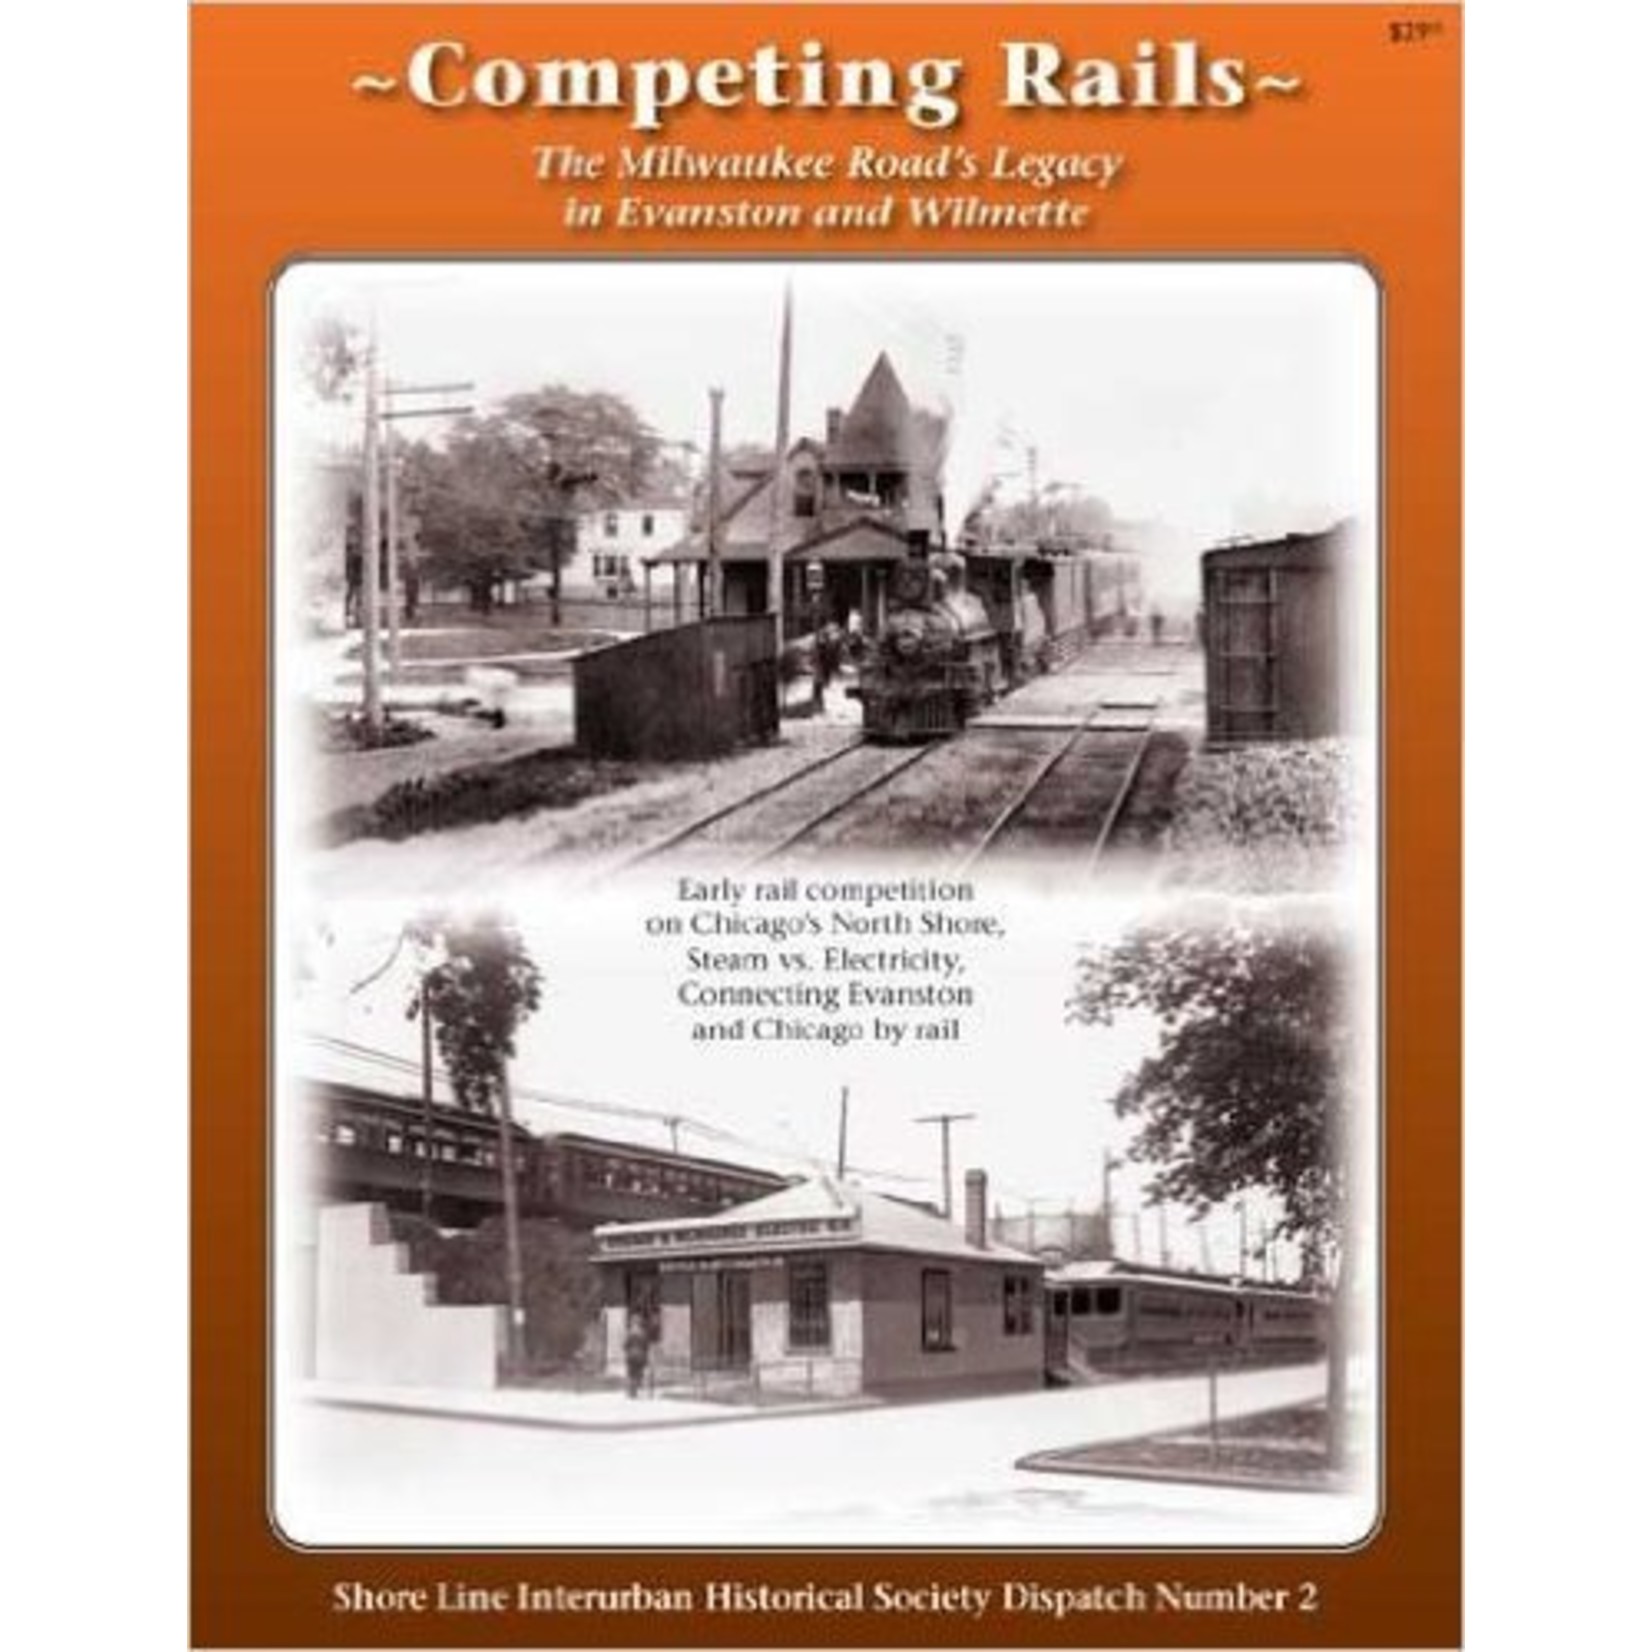 Competing Rails Dispatch Number 2 Shoreline Interurban Historical Society  OUT OF PRINT  $4 OFF